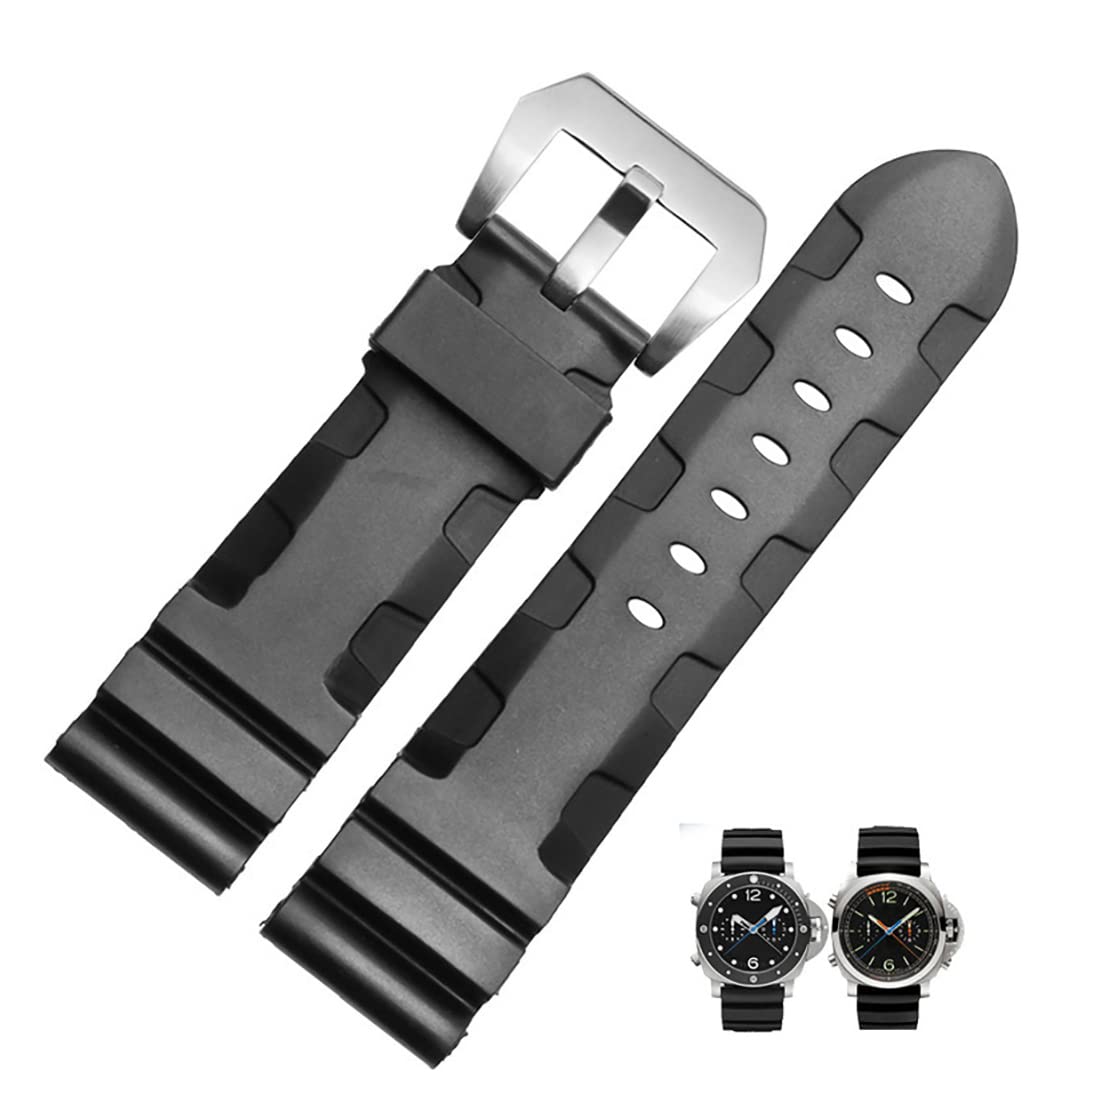 Men's Military Strong Rubber Watch Band Soft Silicone Replacement Watch Strap with Stainless Steel Wide Buckle Universal Strap Waterproof Sport Black